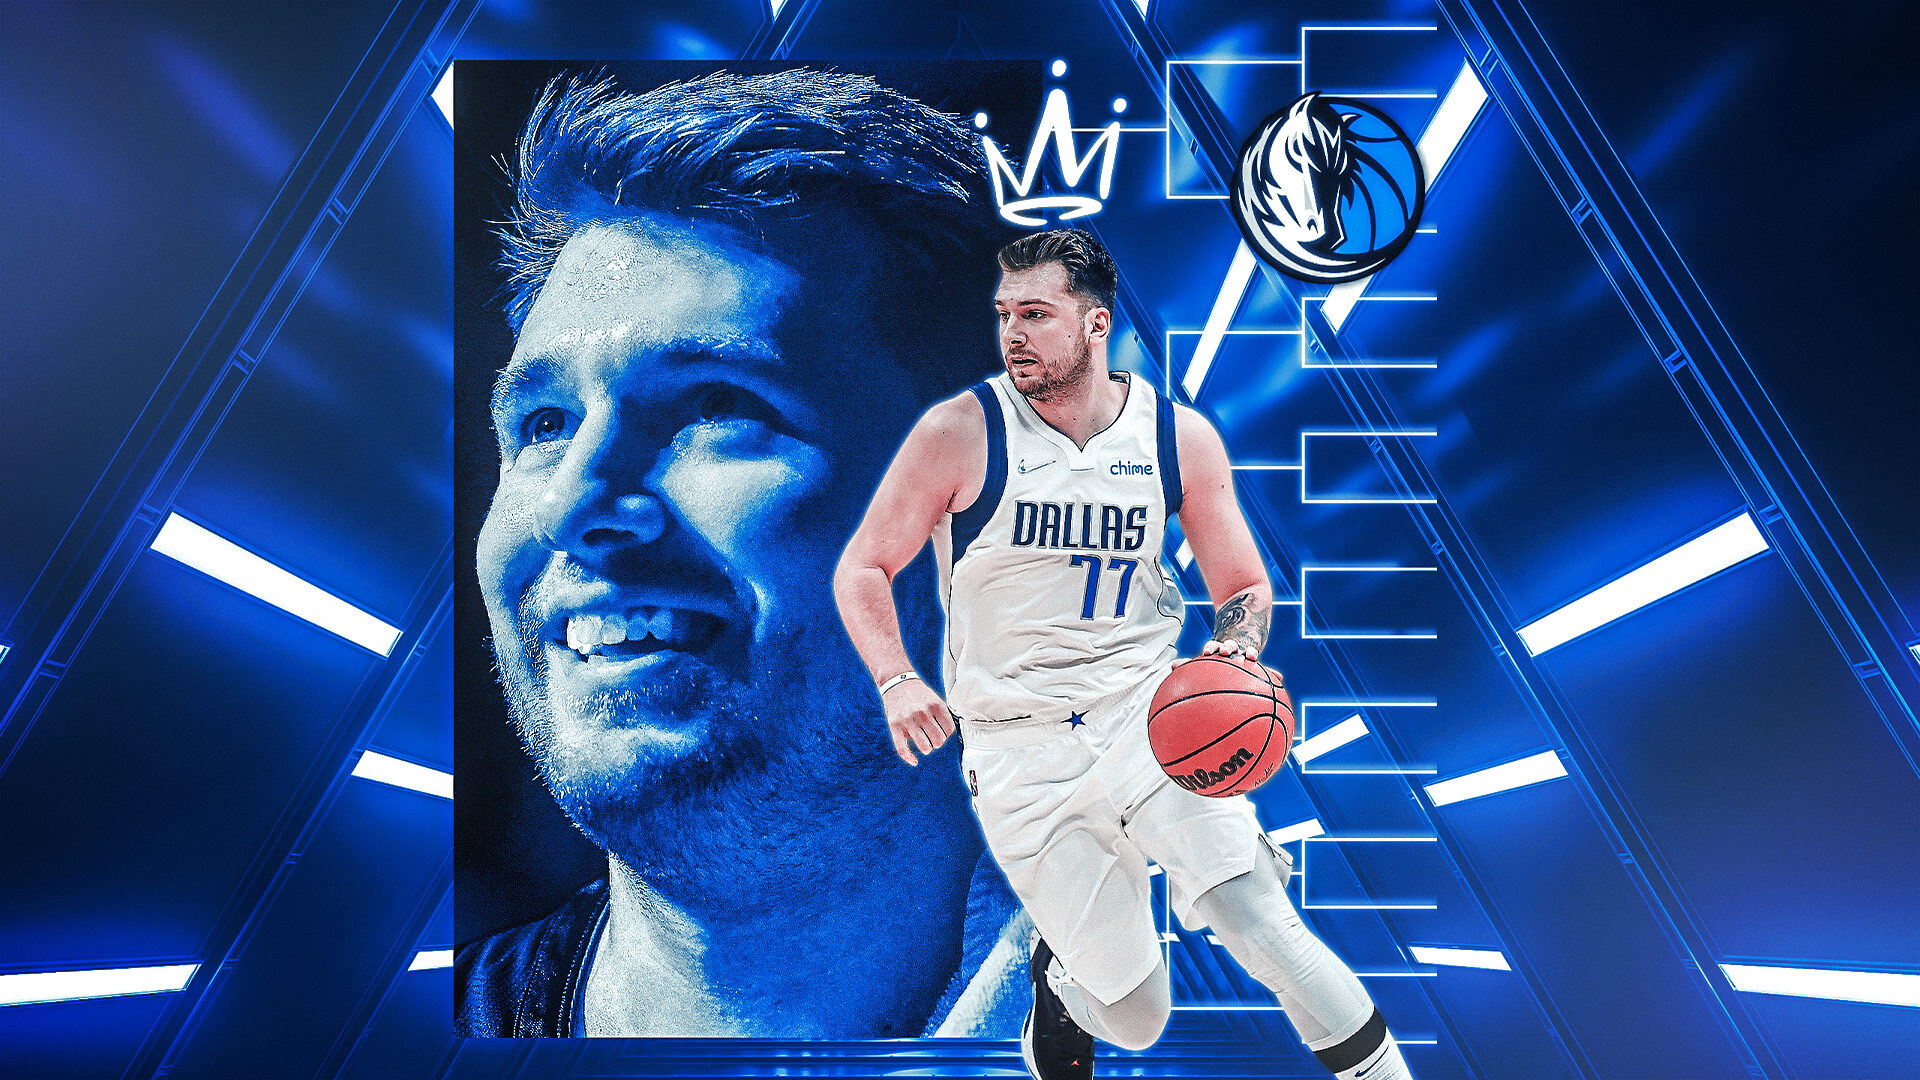 Is Luka Dončić one of the greatest playoff performers in NBA history?